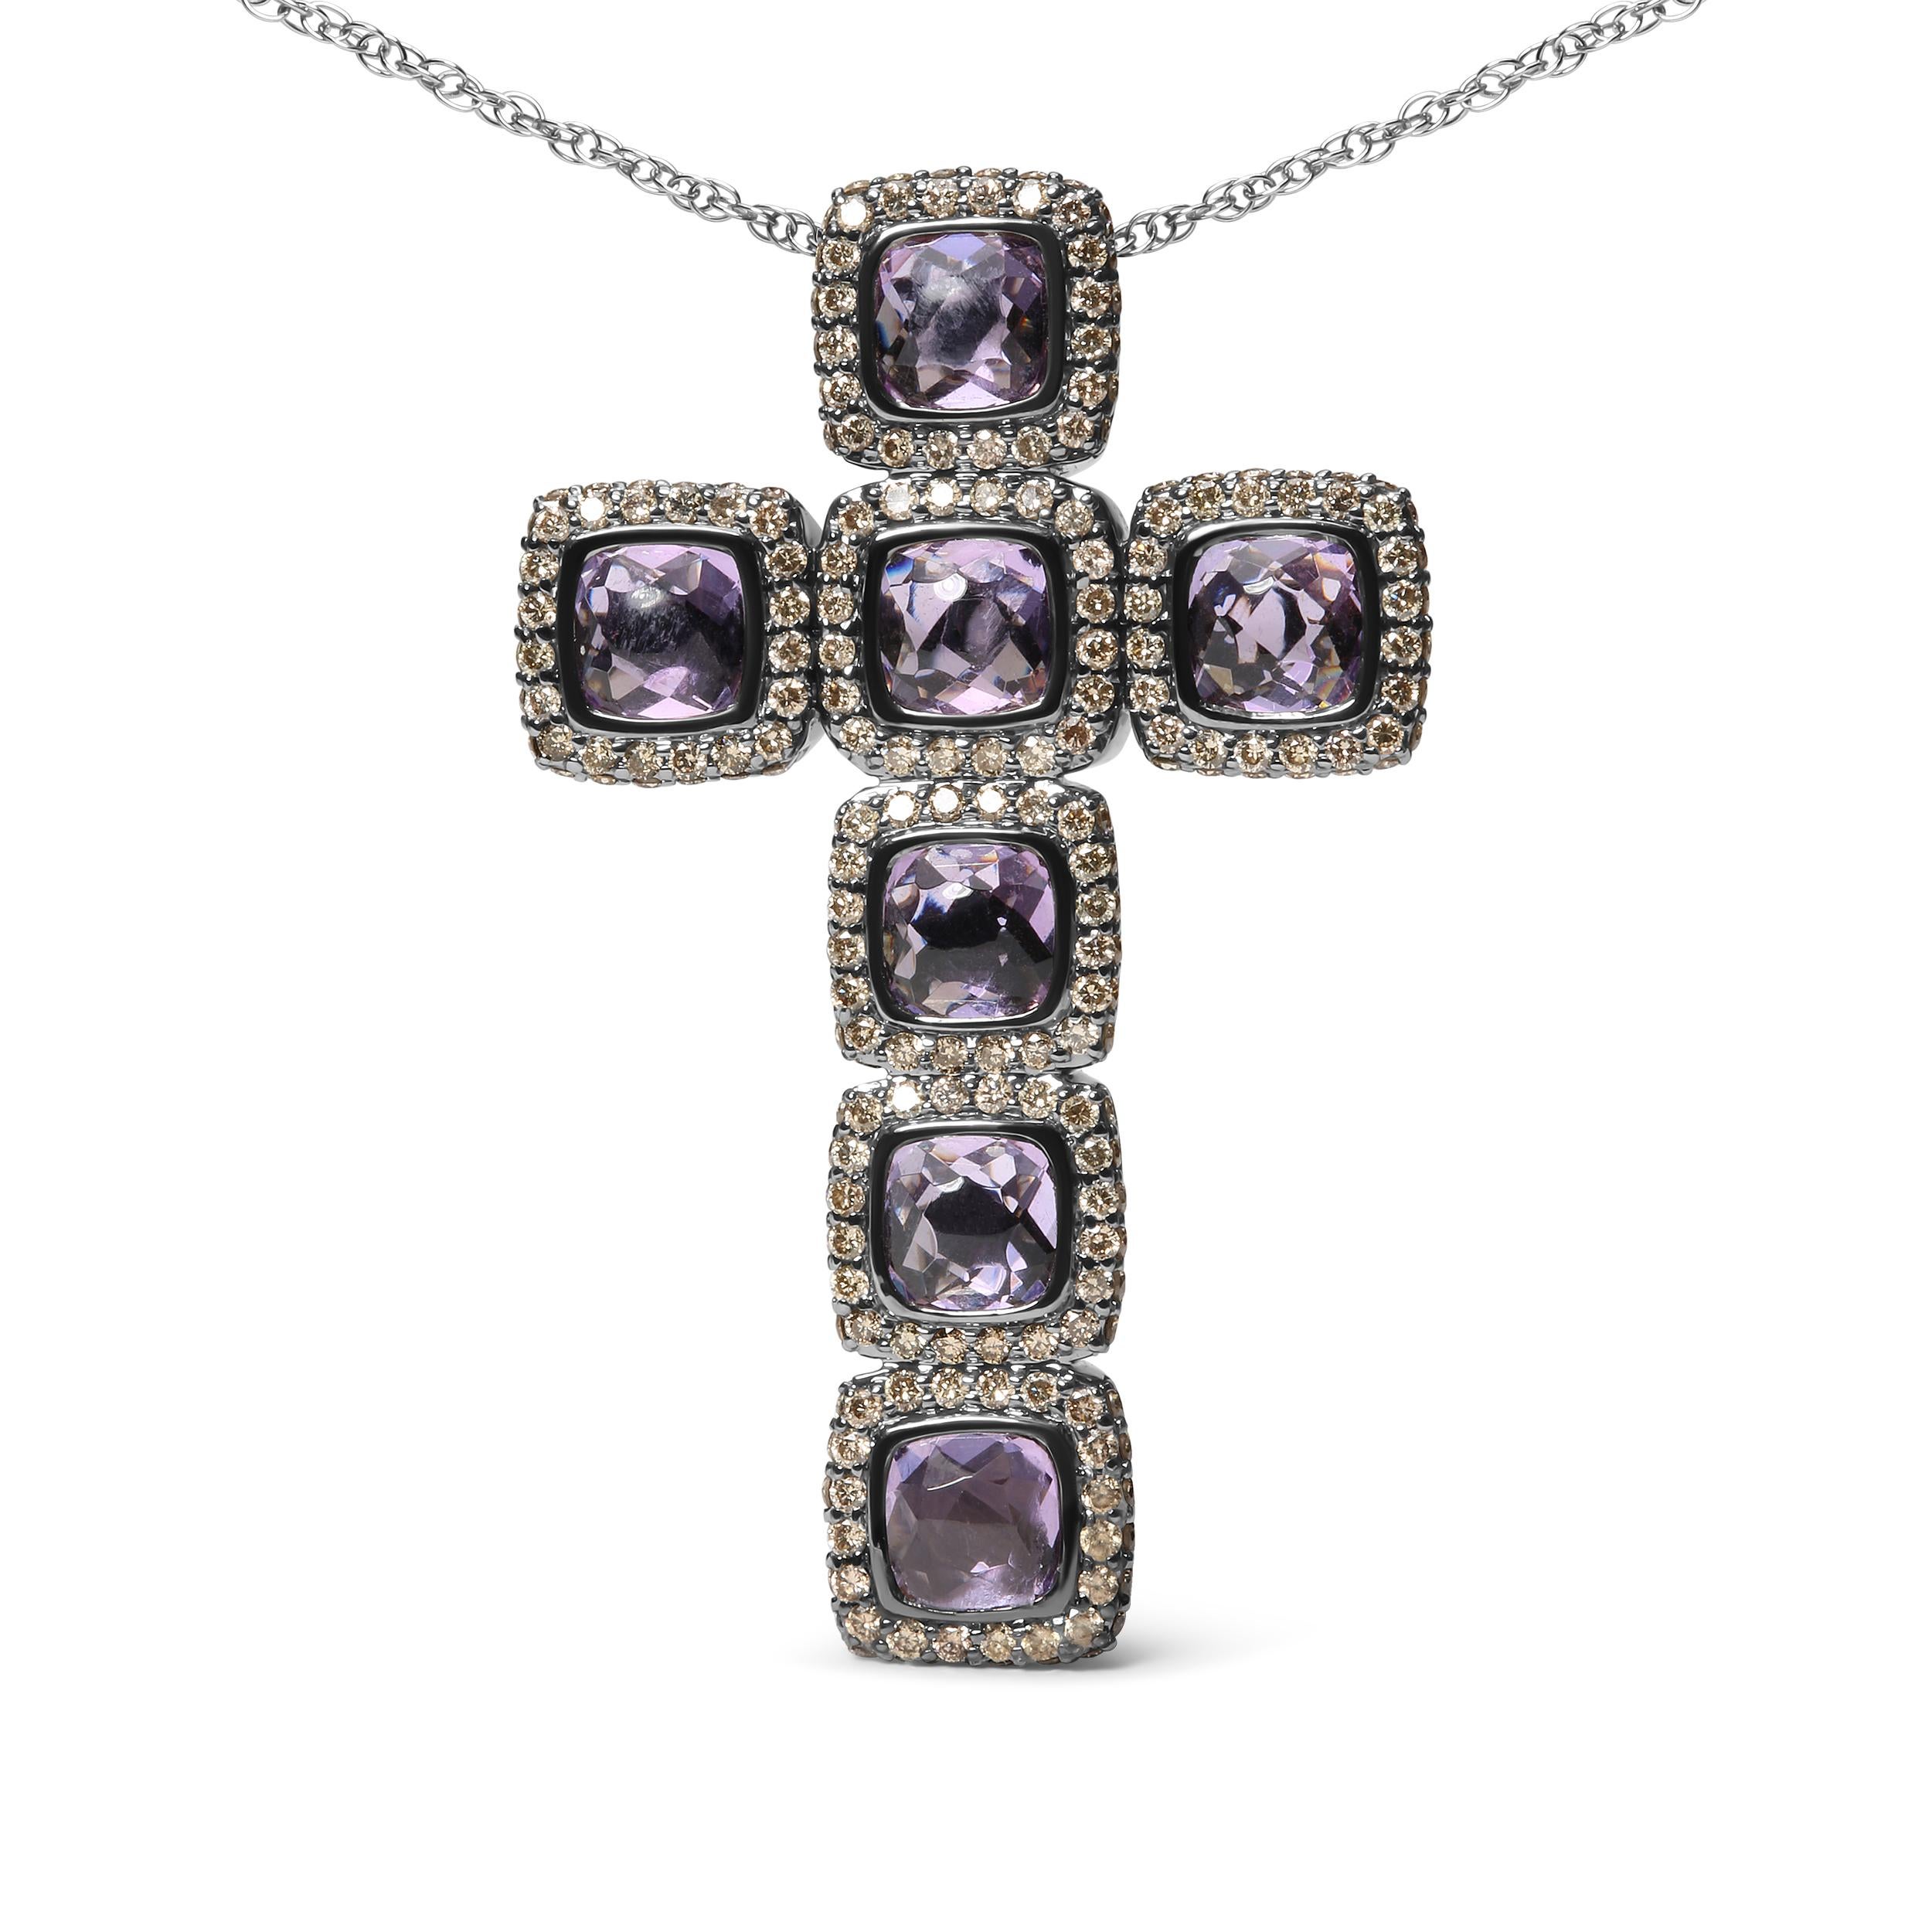 Express your faith in style with this captivating cross pendant necklace made of black rhodium plated 18k rose gold. This unique design is set with a total of seven natural 4 mm cushion-cut Rose De France purple amethysts secured within bezel